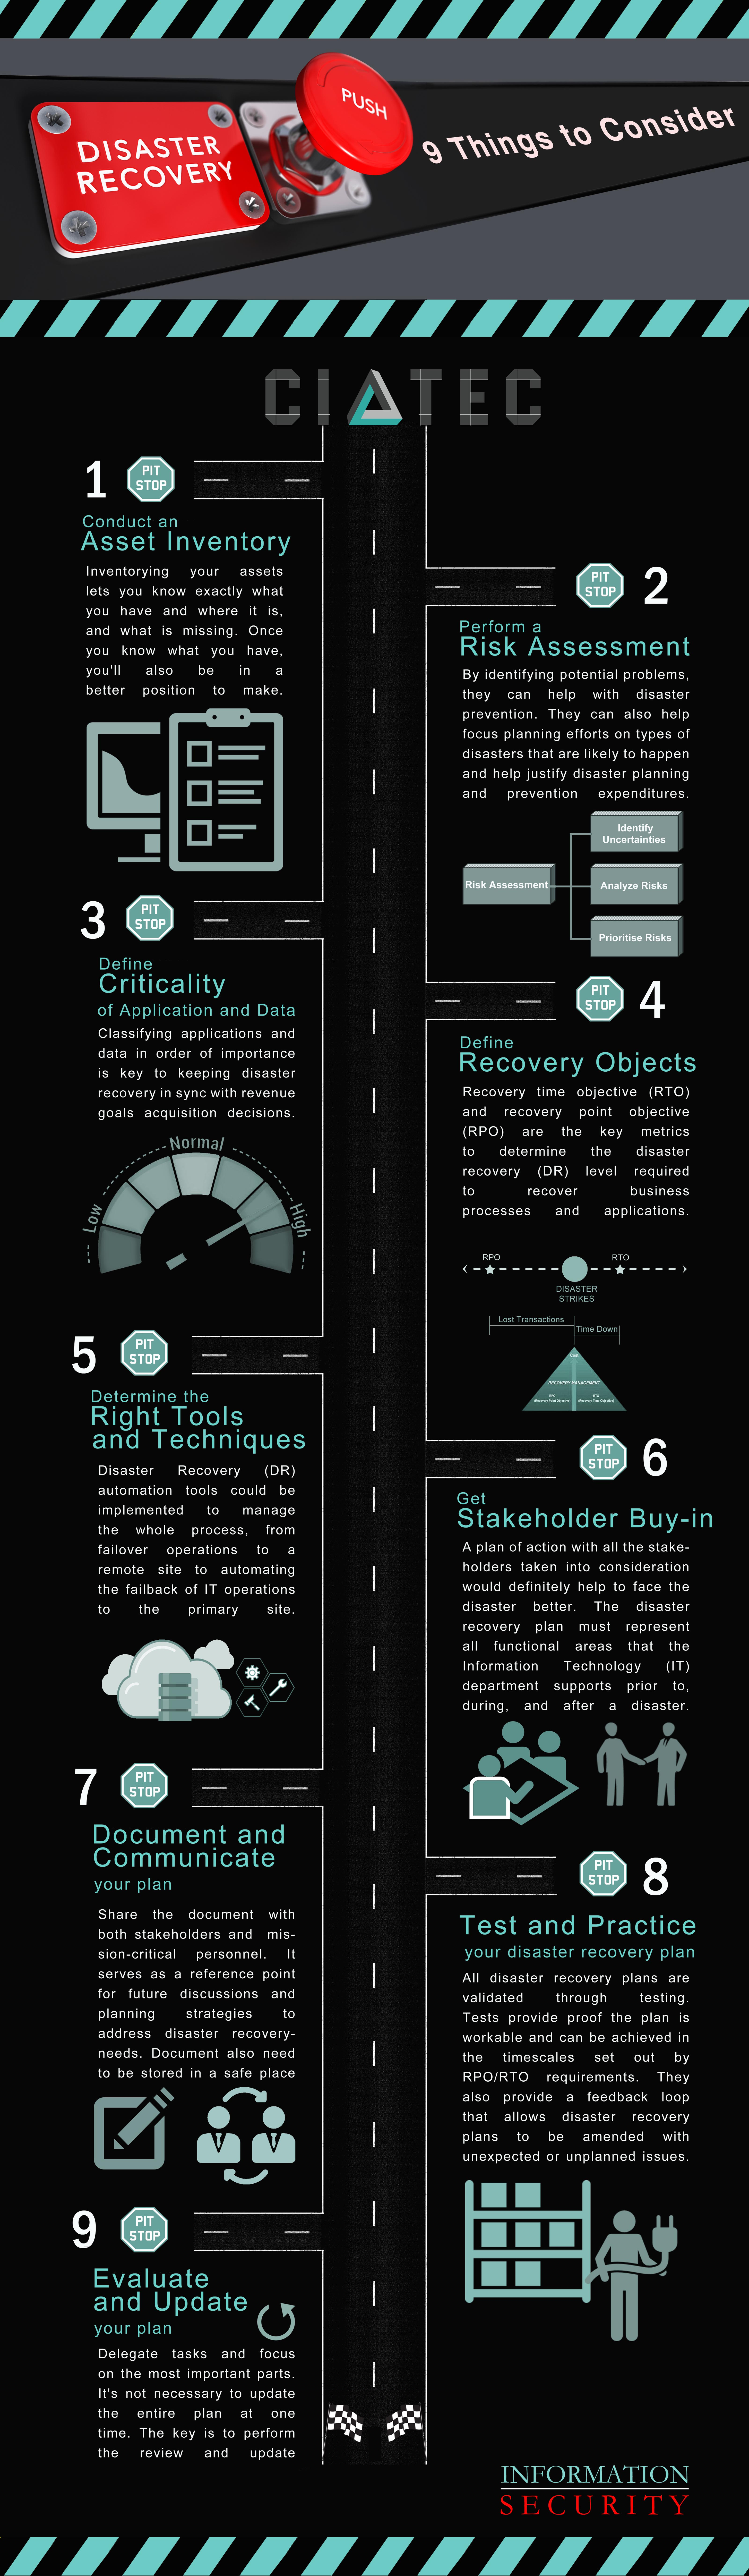 9 Pit Stops for an Effective Disaster Recovery Plan